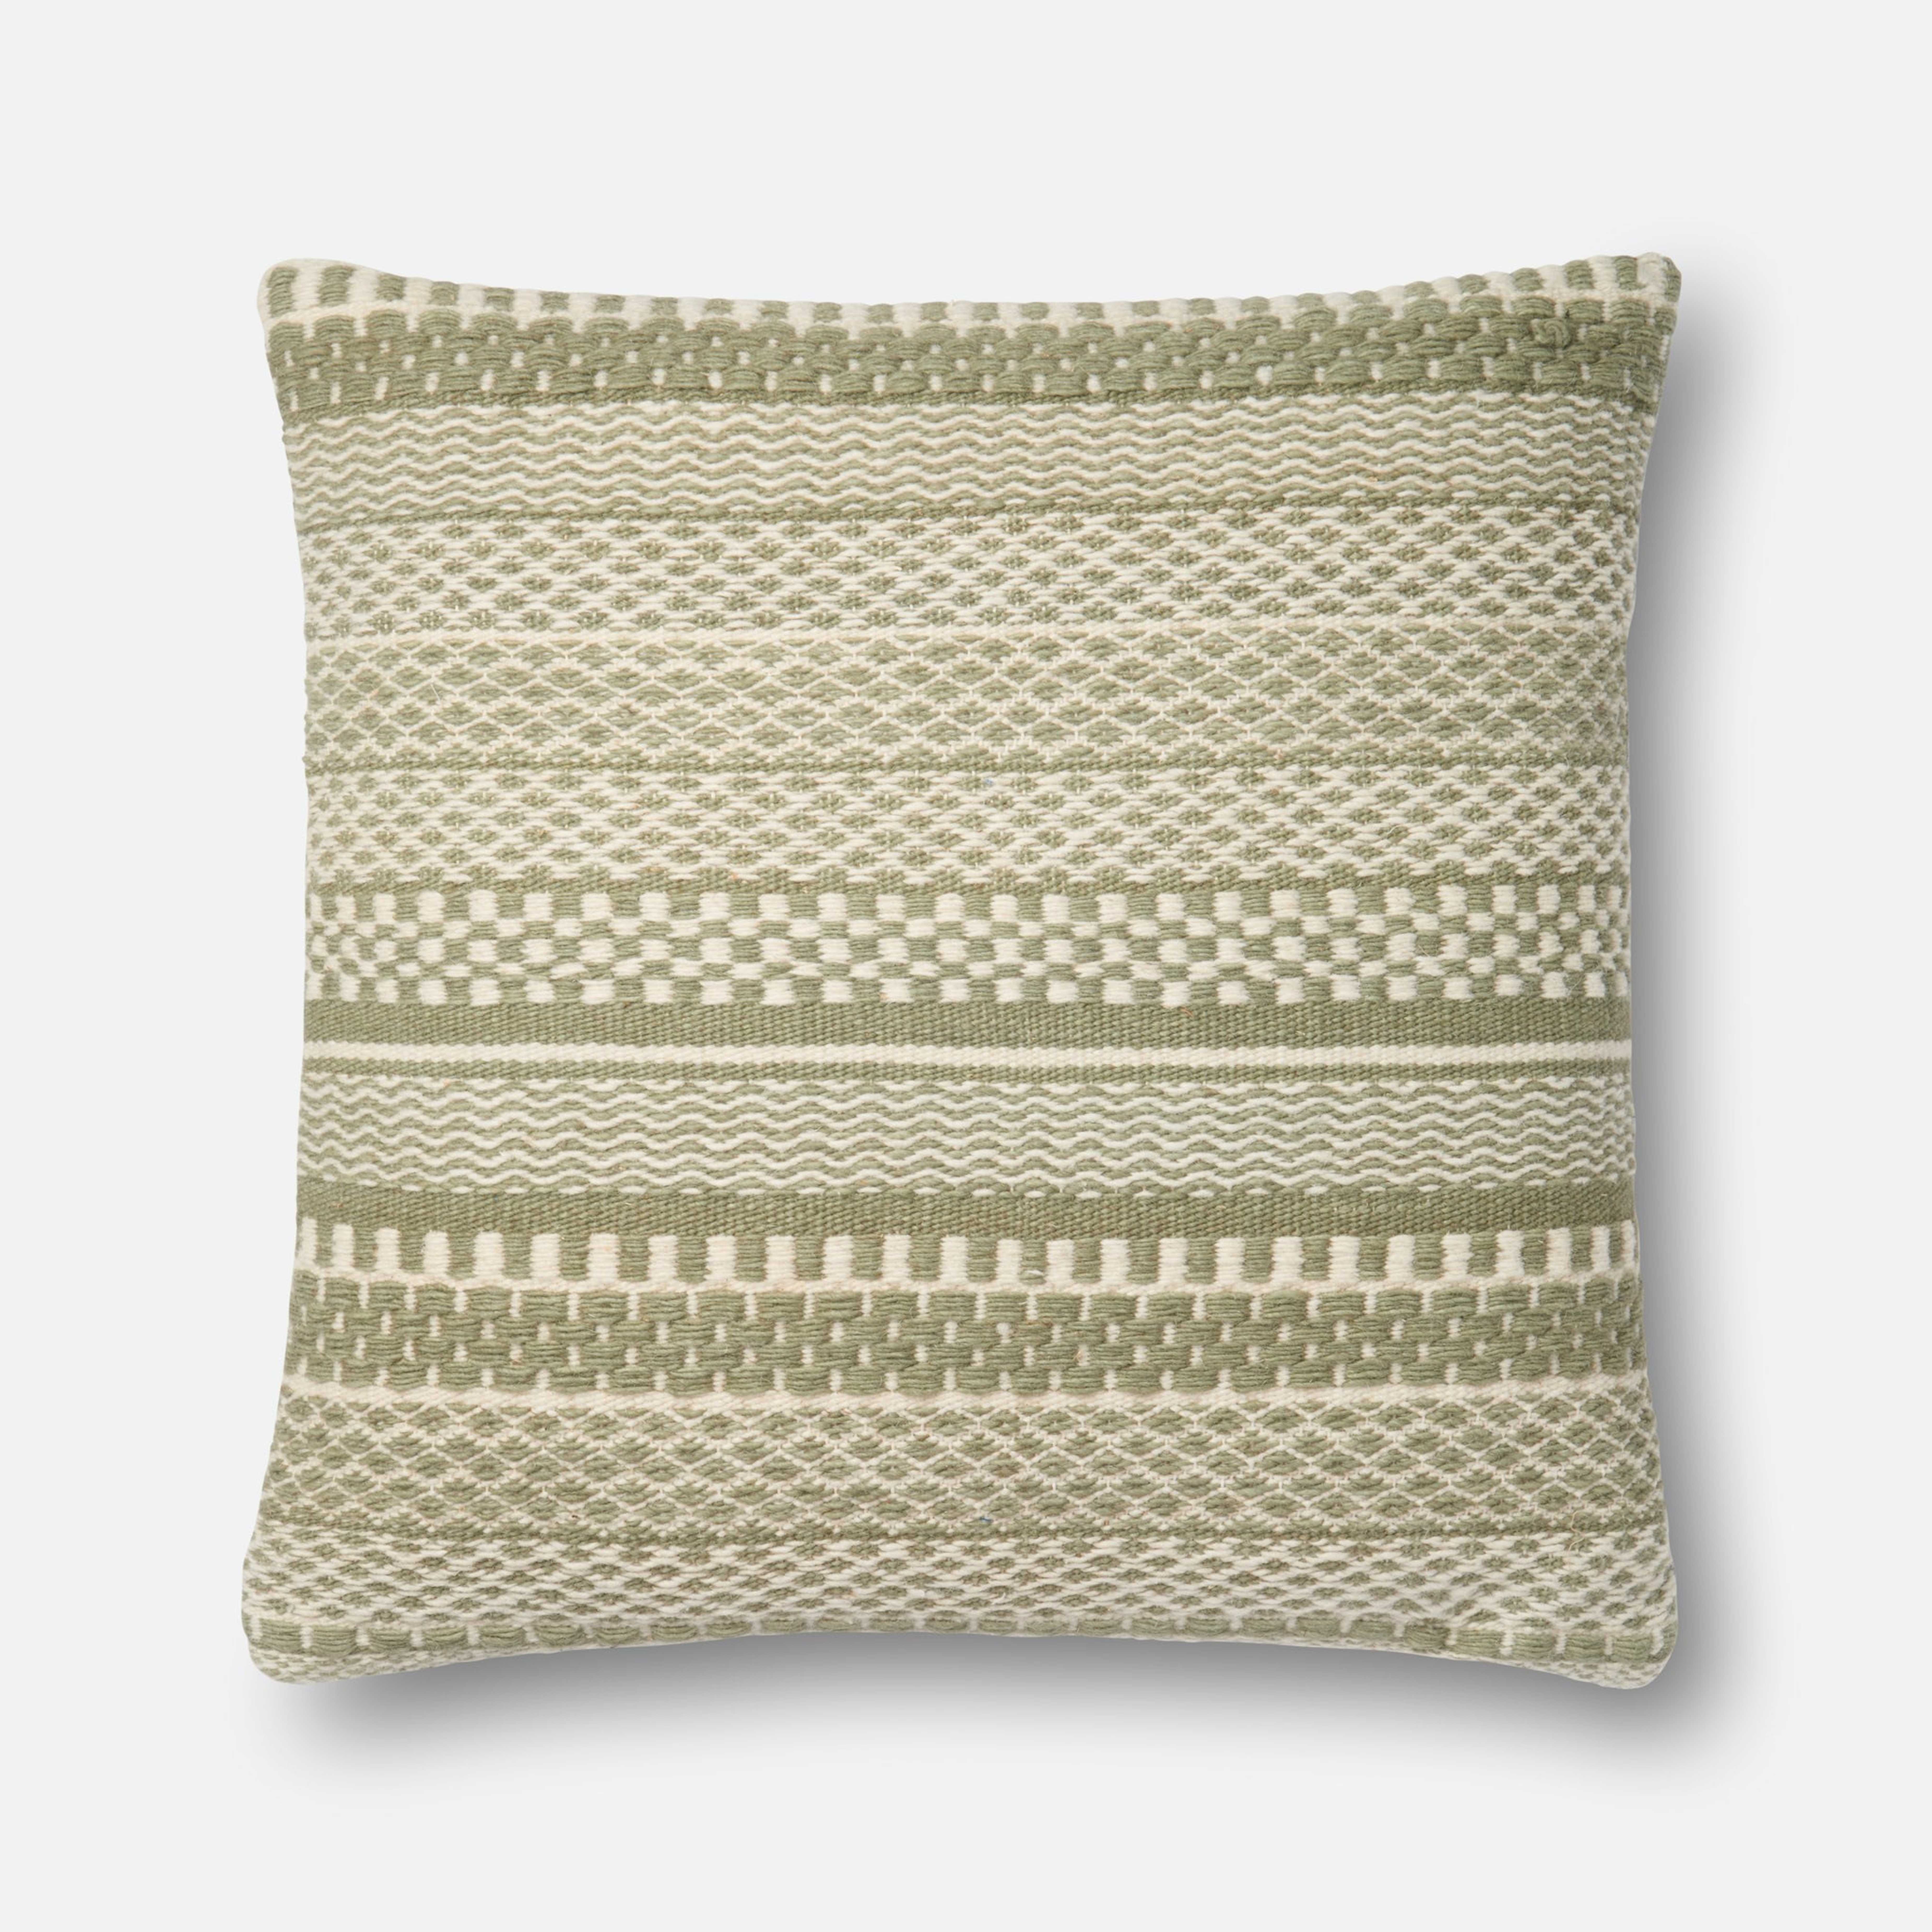 PILLOWS - SAGE / IVORY - Loloi Rugs